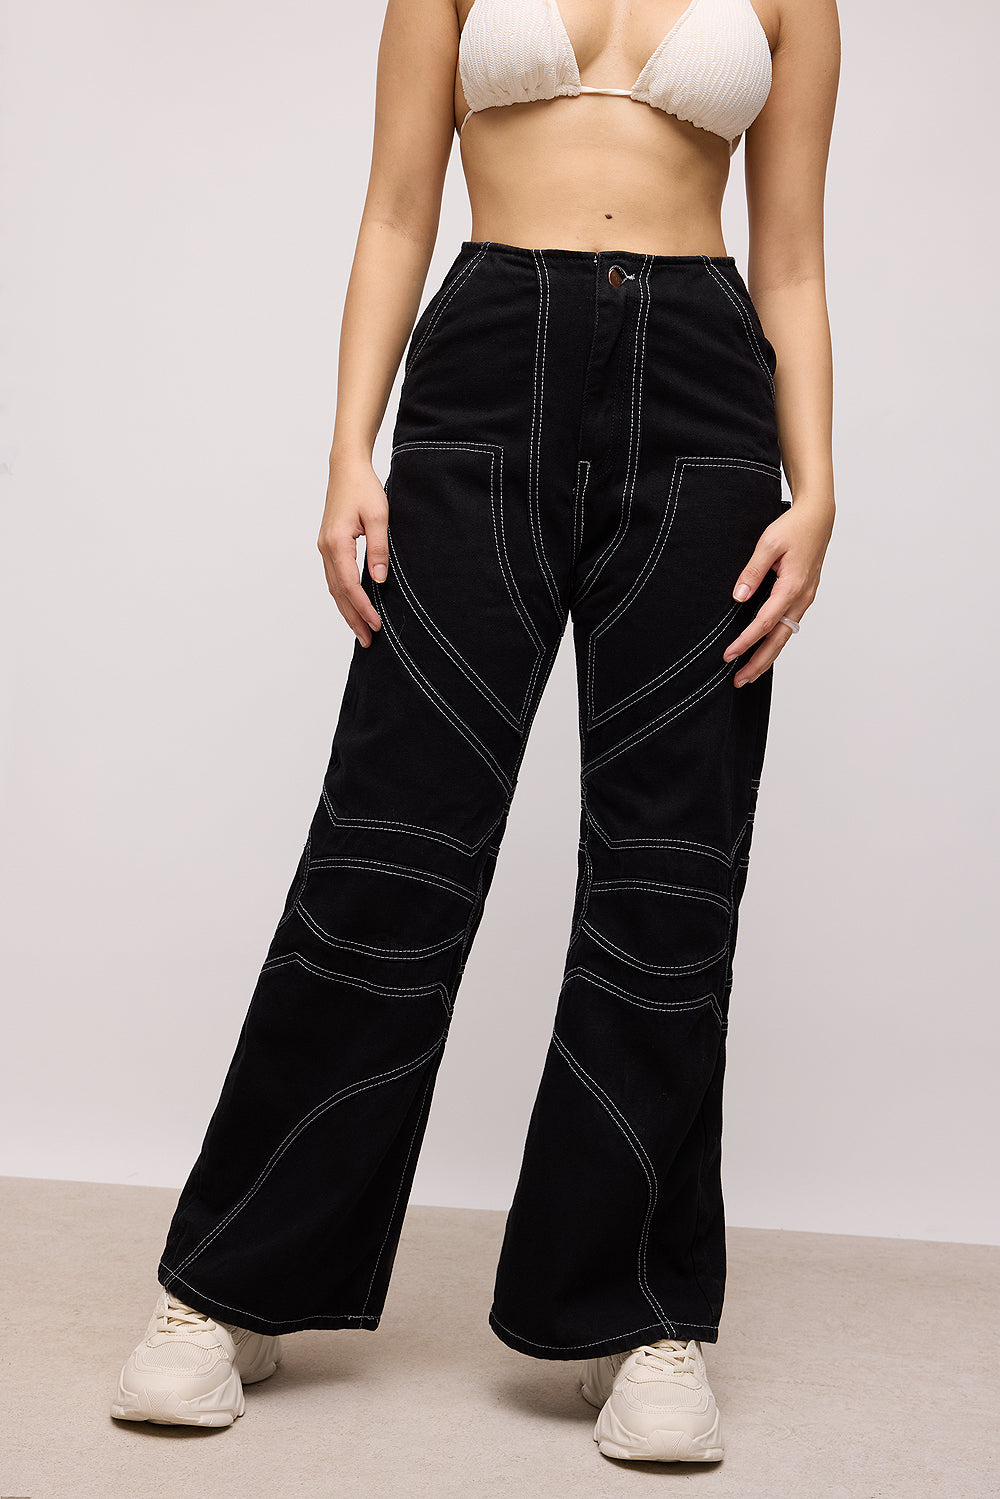 ABSTRACT BLACK WIDE PANTS